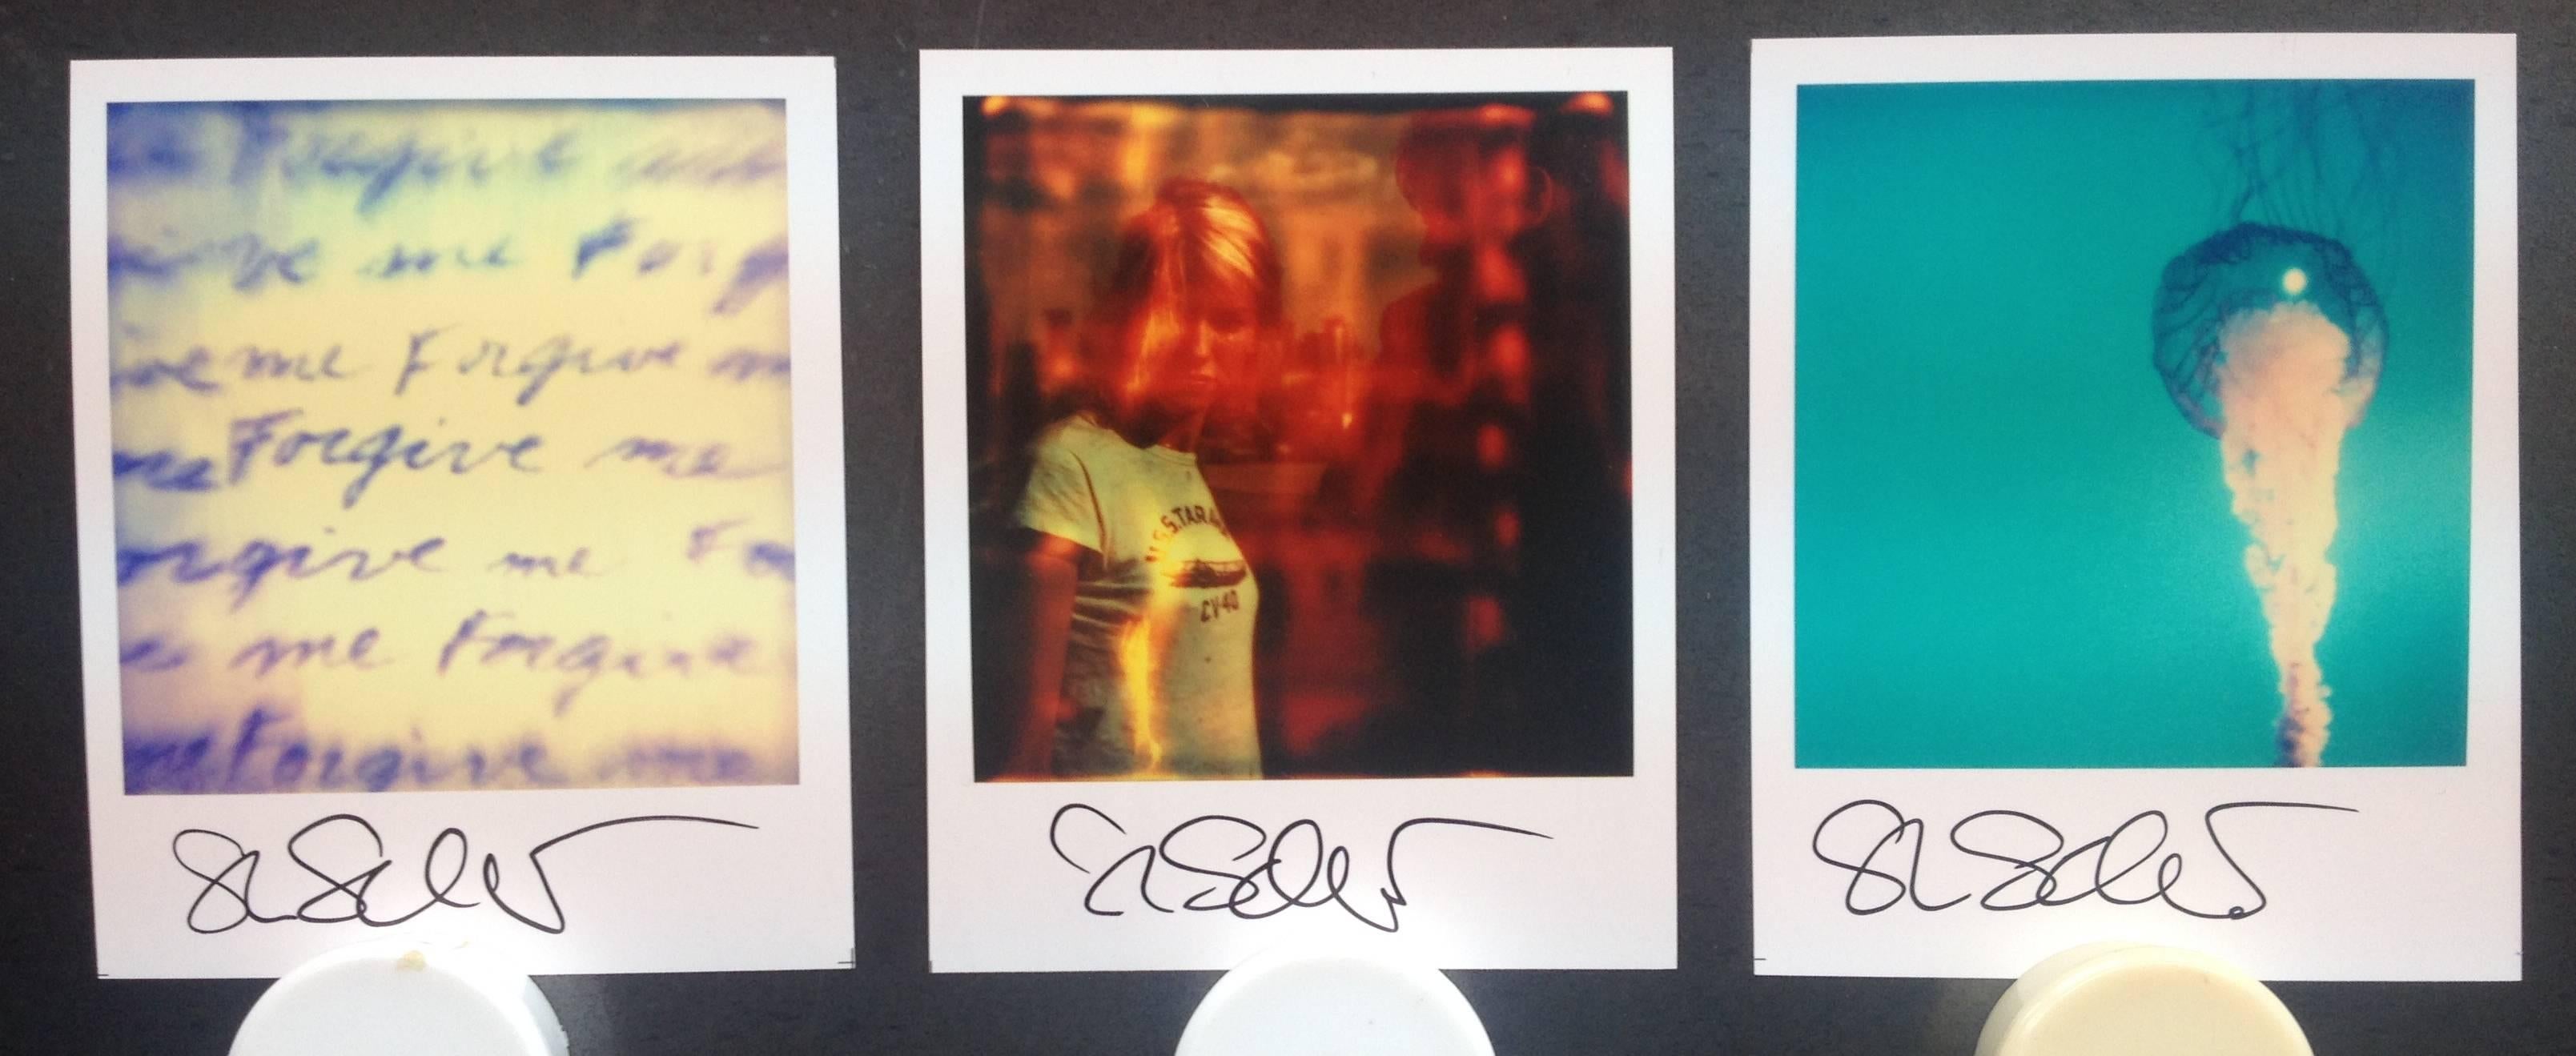 3 Stefanie Schneider's Minis
from the movie Stay: 'Forgive me', 'Lila', 'Jellyfish'
signed in front, not mounted
Lambda digital Color Photographs based on a Polaroid

Polaroid sized open Editions 1999-2013
each 10.7 x 8.8cm (Image 7.9x7.7cm)
